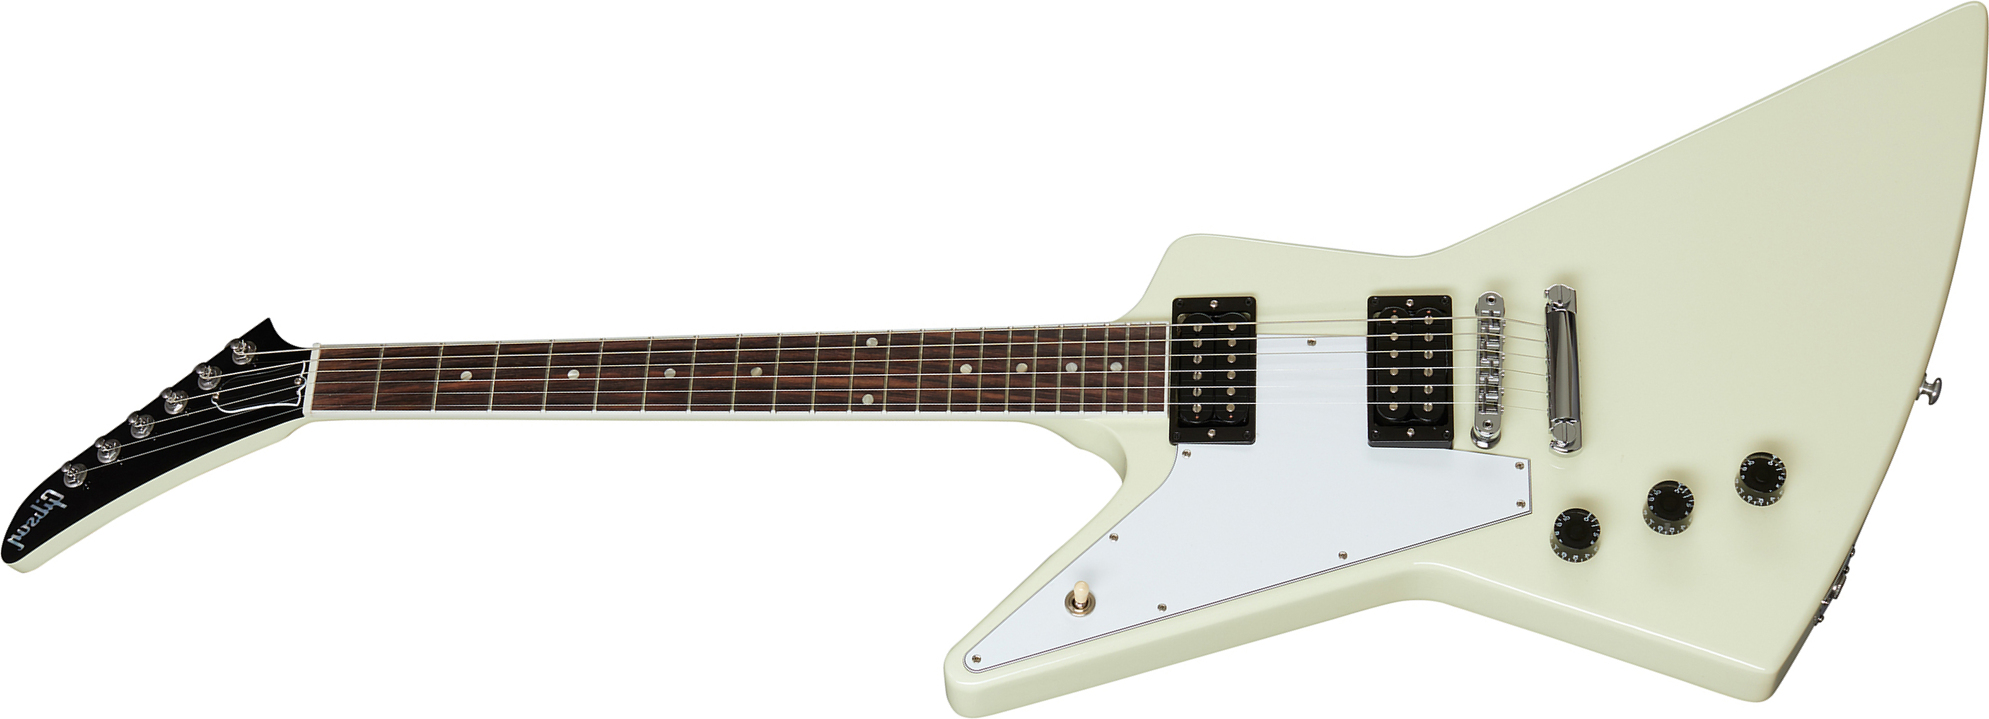 Gibson Explorer 70s Original Gaucher Hh Ht Rw - Classic White - Left-handed electric guitar - Main picture